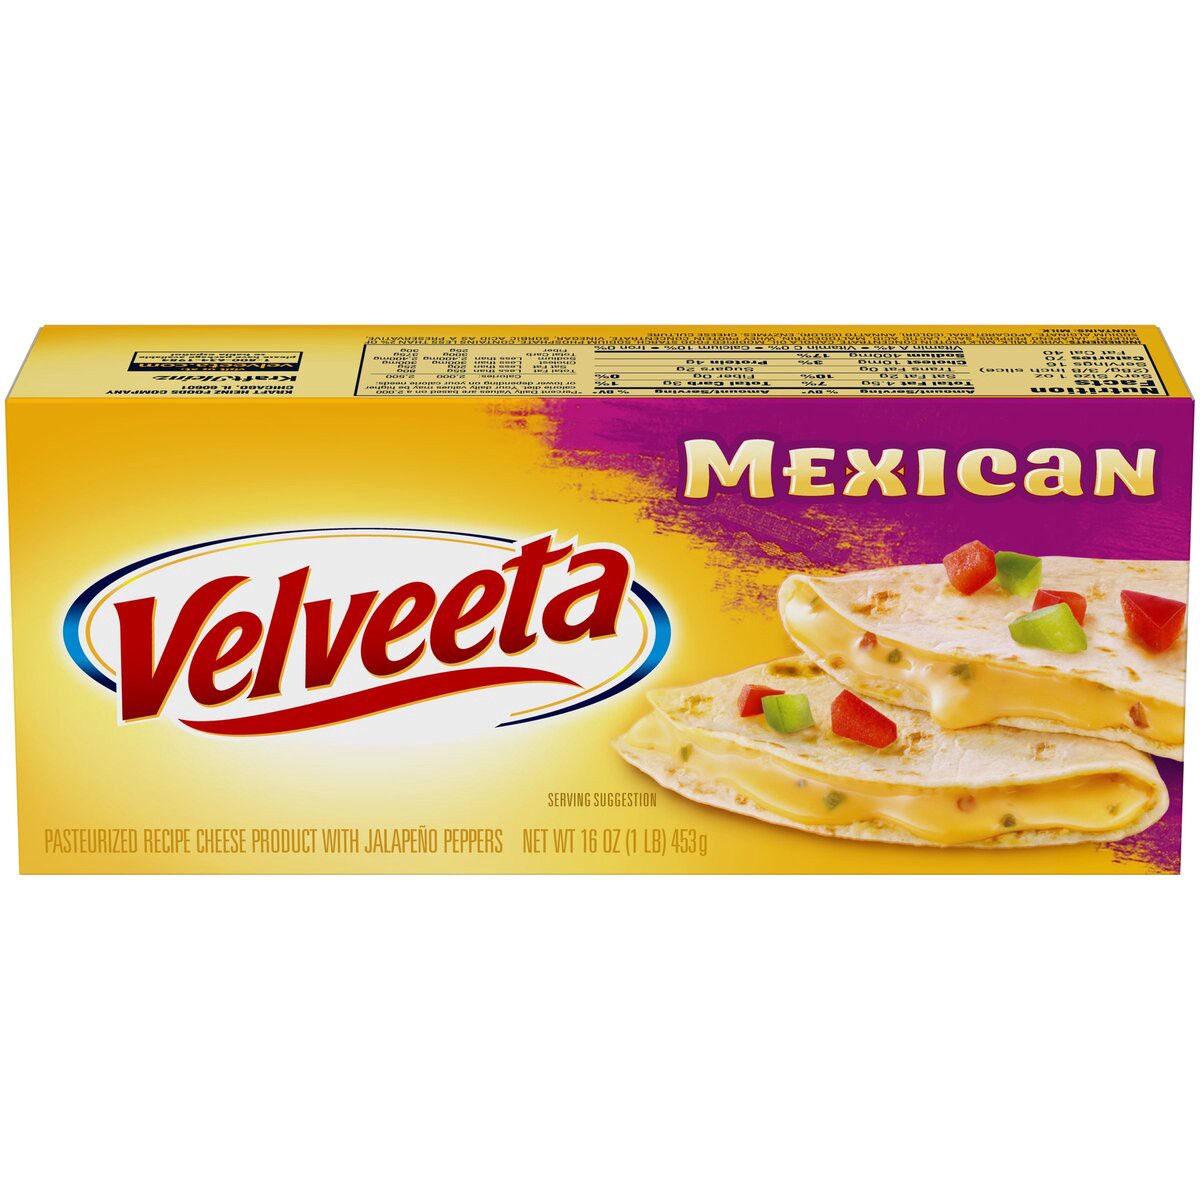 slide 1 of 5, Velveeta Mexican Pasteurized Recipe Cheese Product with Jalapeno Peppers, 16 oz Block, 16 oz